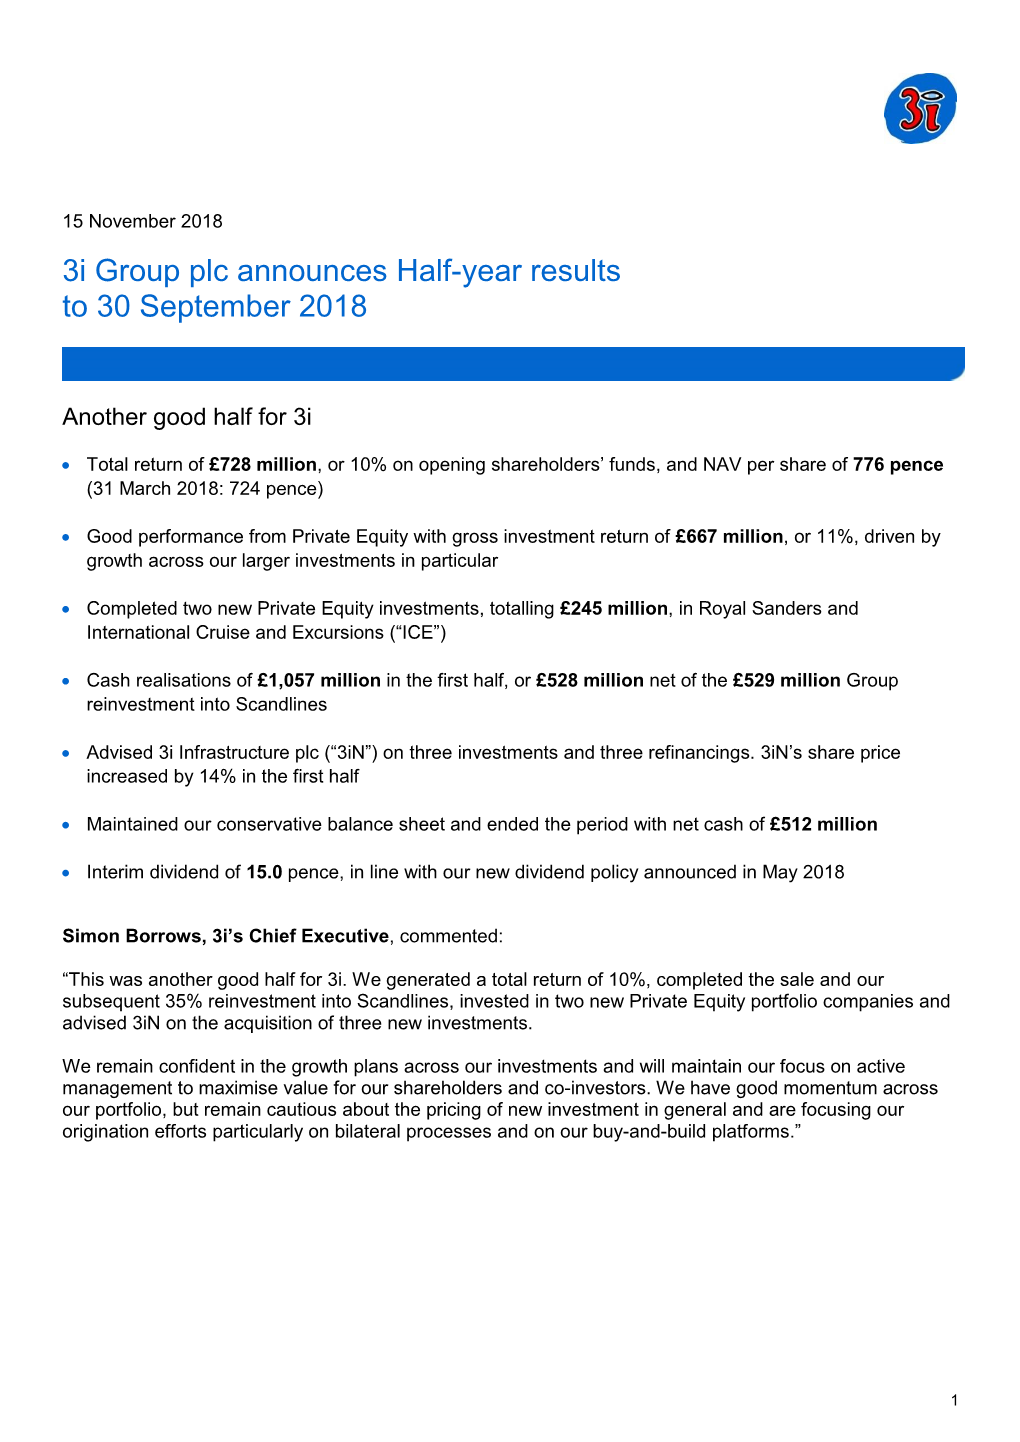 3I Group Plc Announces Half-Year Results to 30 September 2018